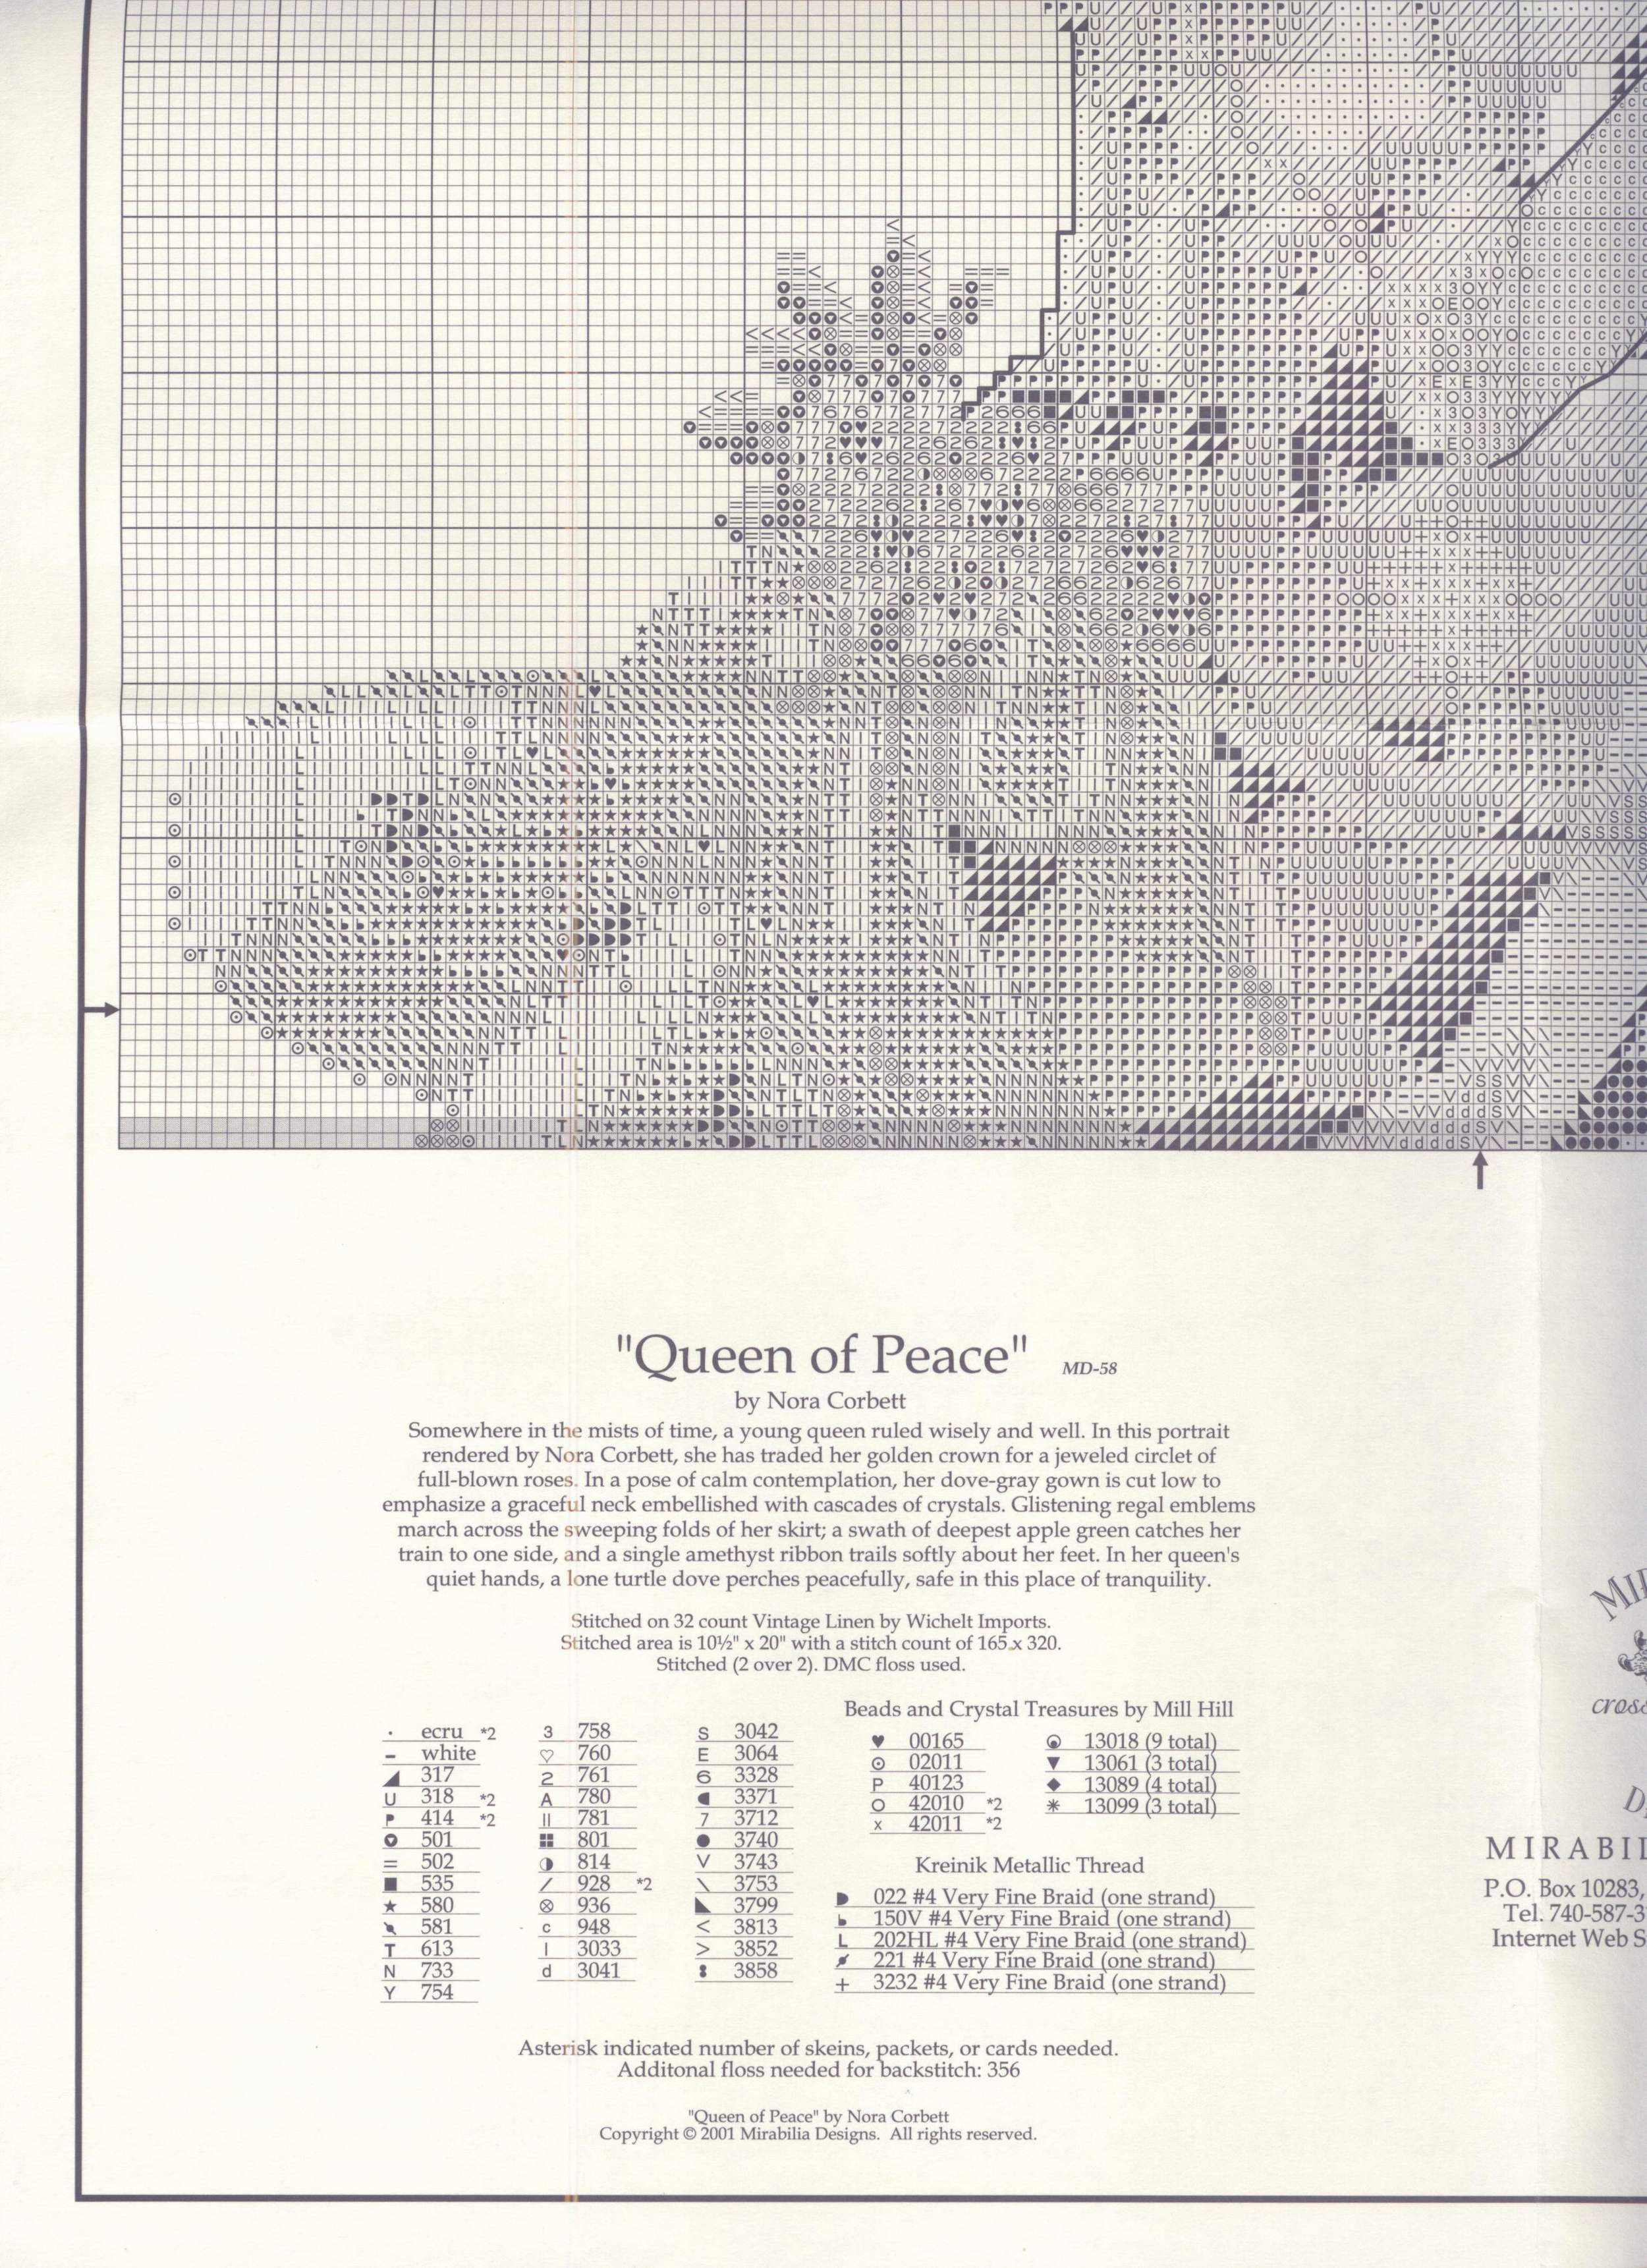 MD58 Queen of peace chart3